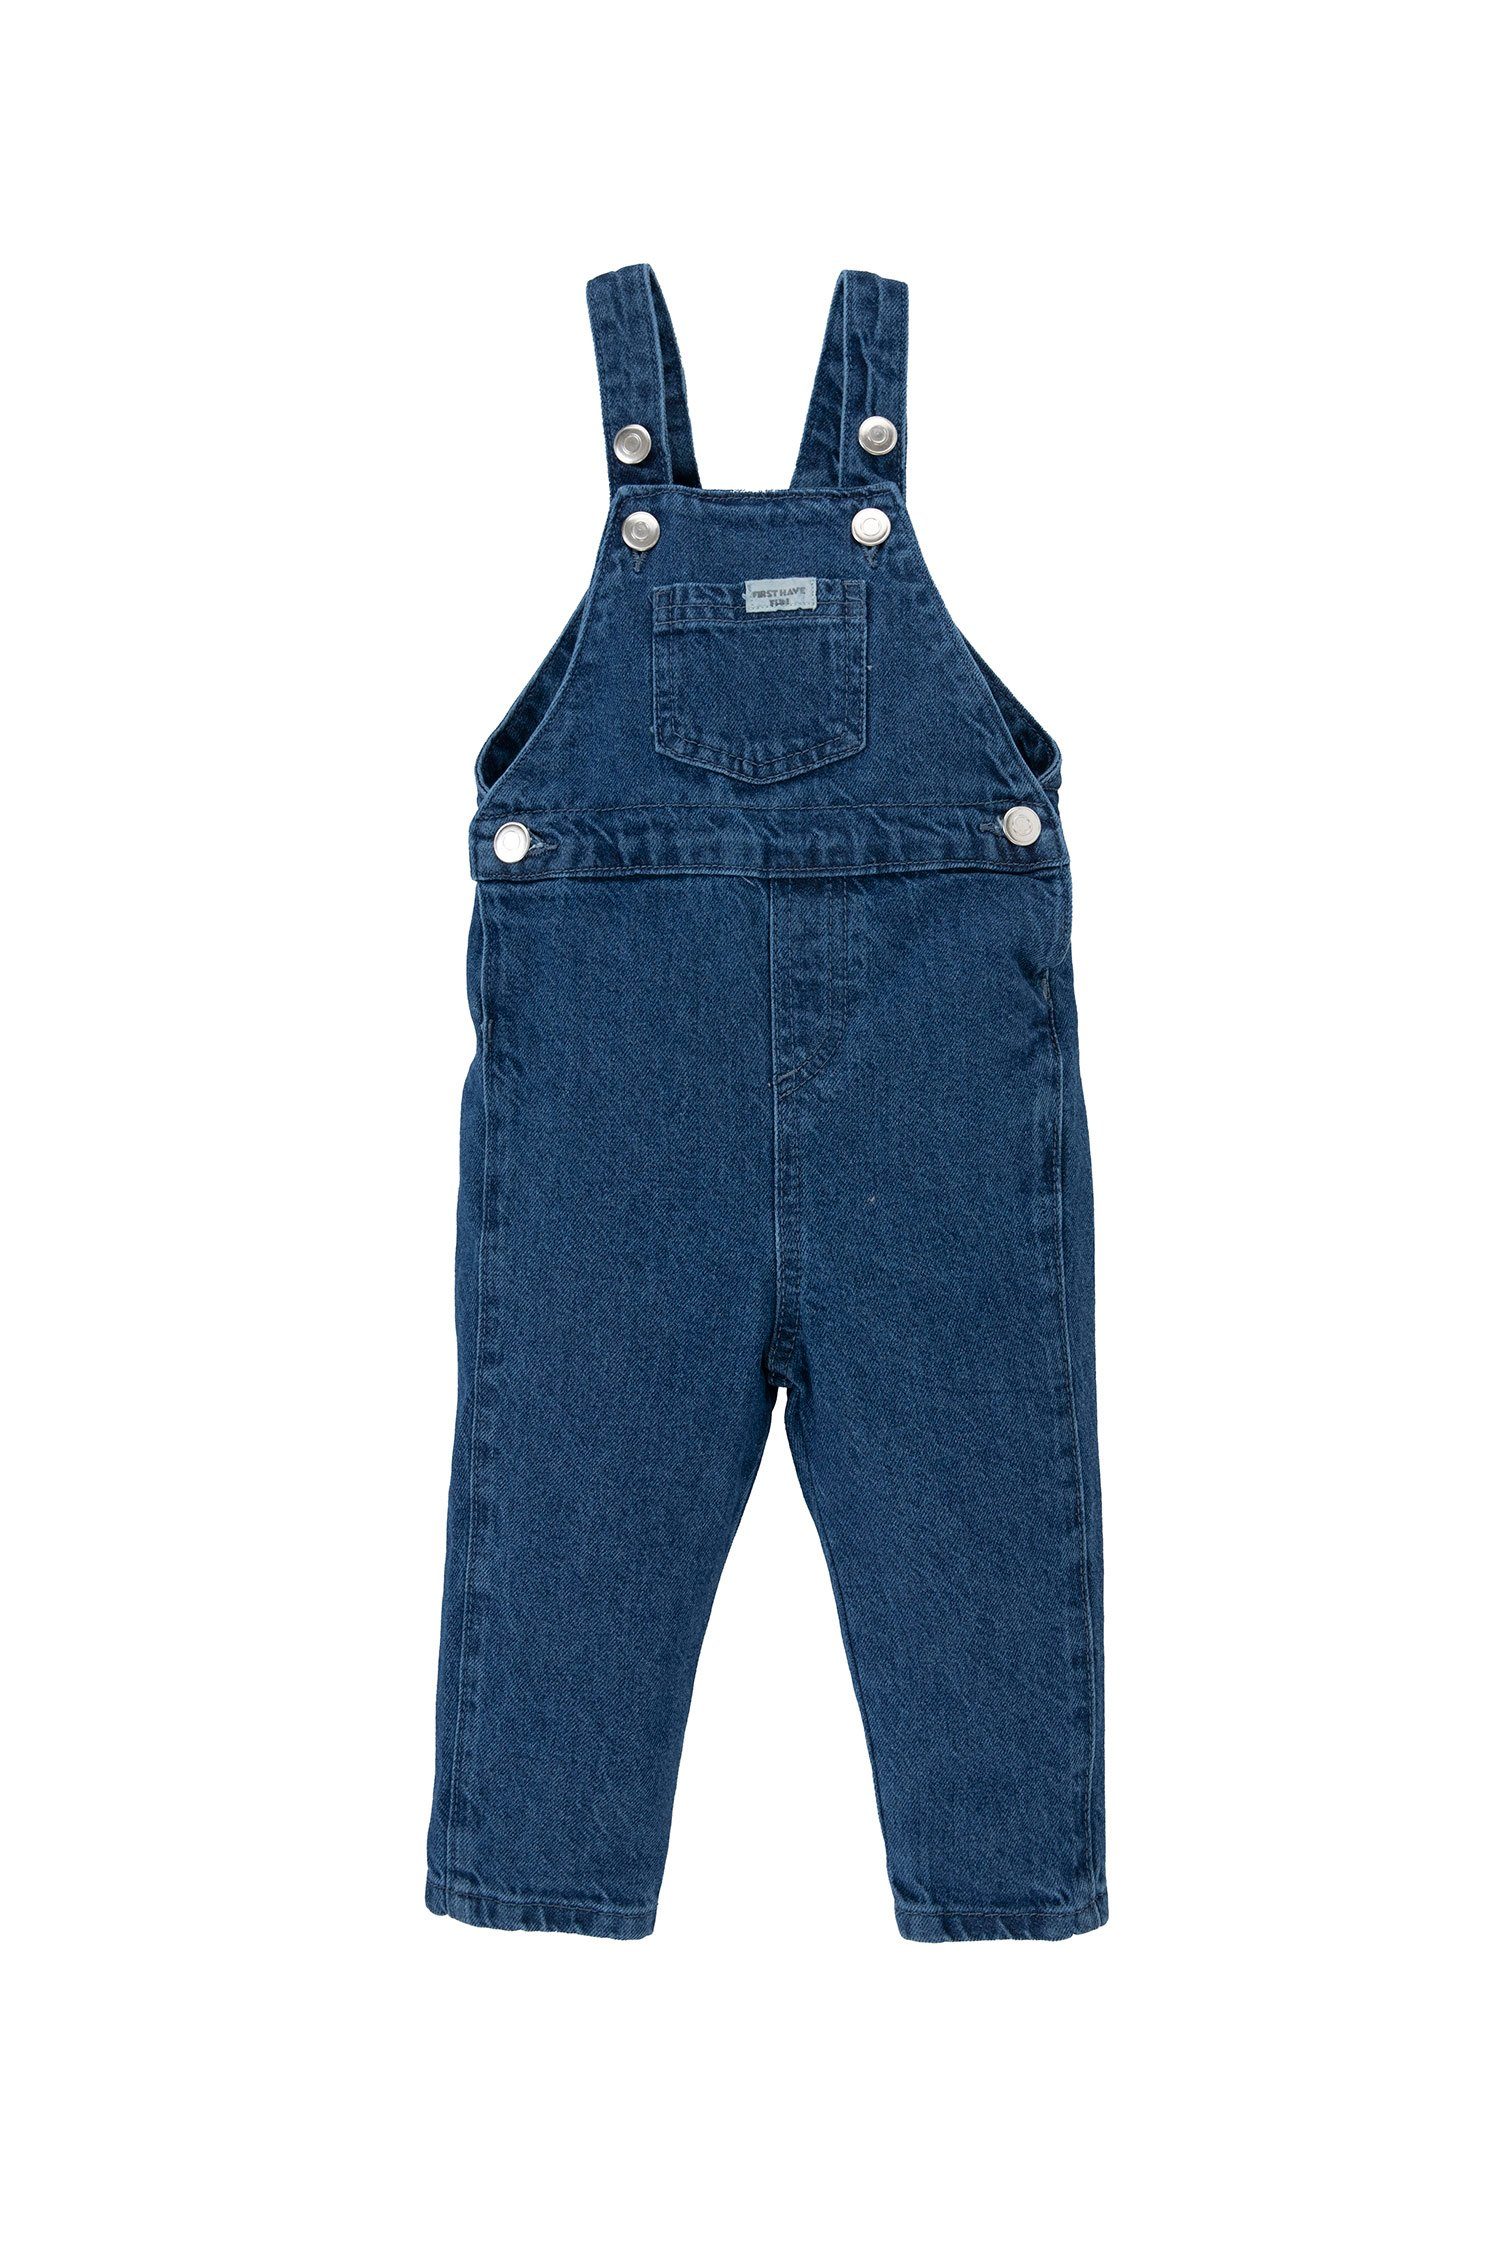 DeFacto Overall BabyBoy Overall REGULAR FIT